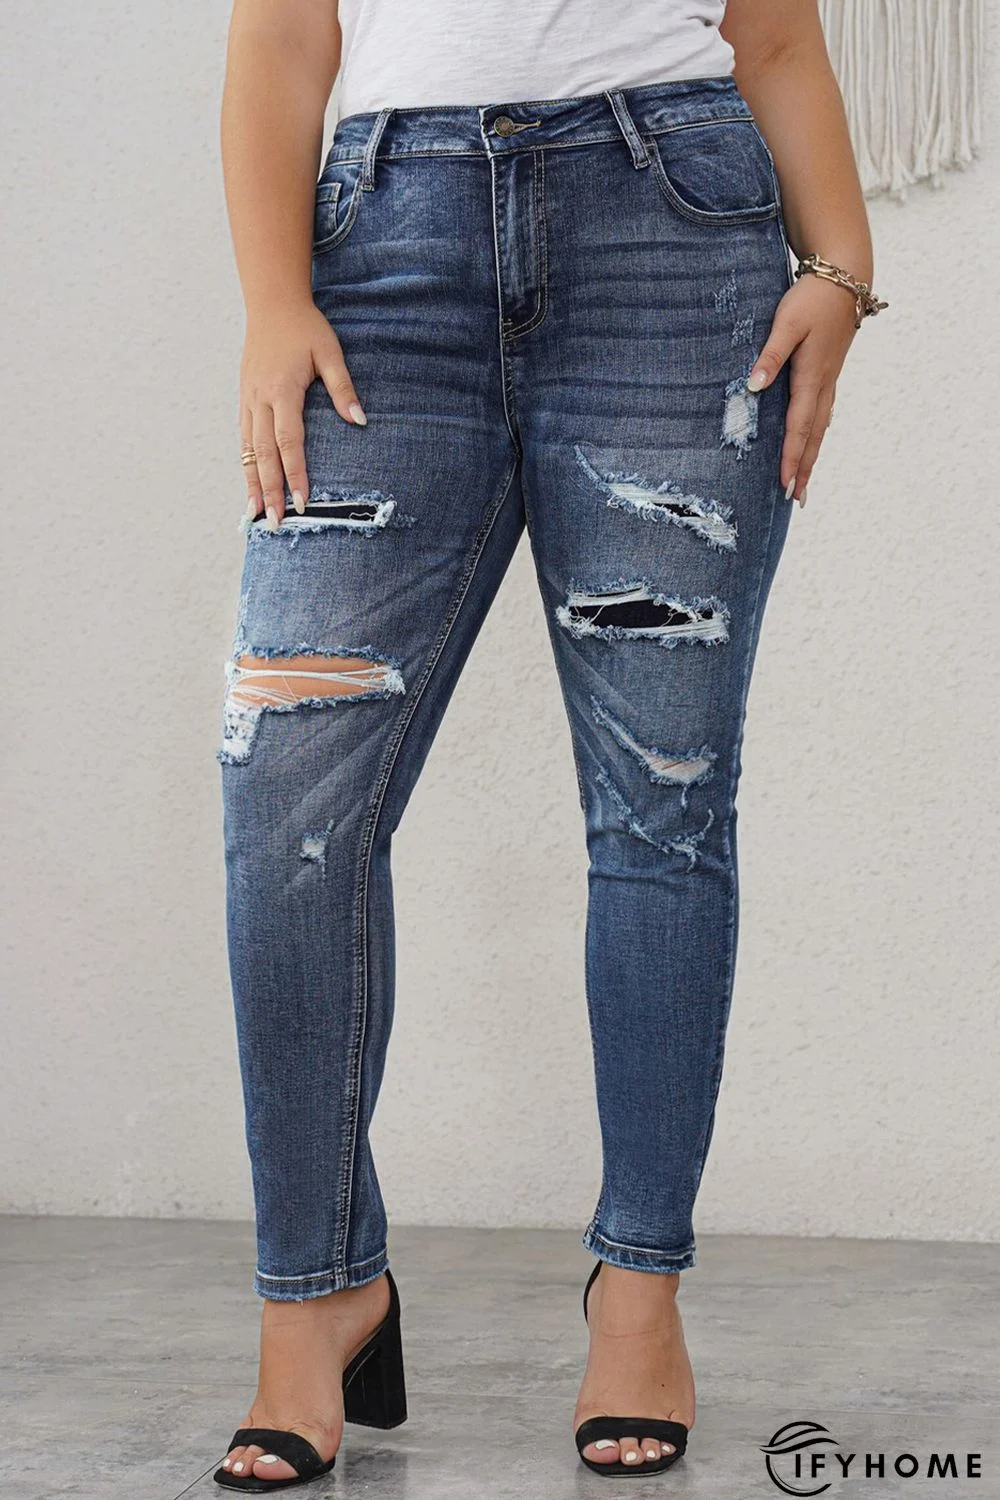 Blue Distressed High Waist Plus Size Jeans | IFYHOME